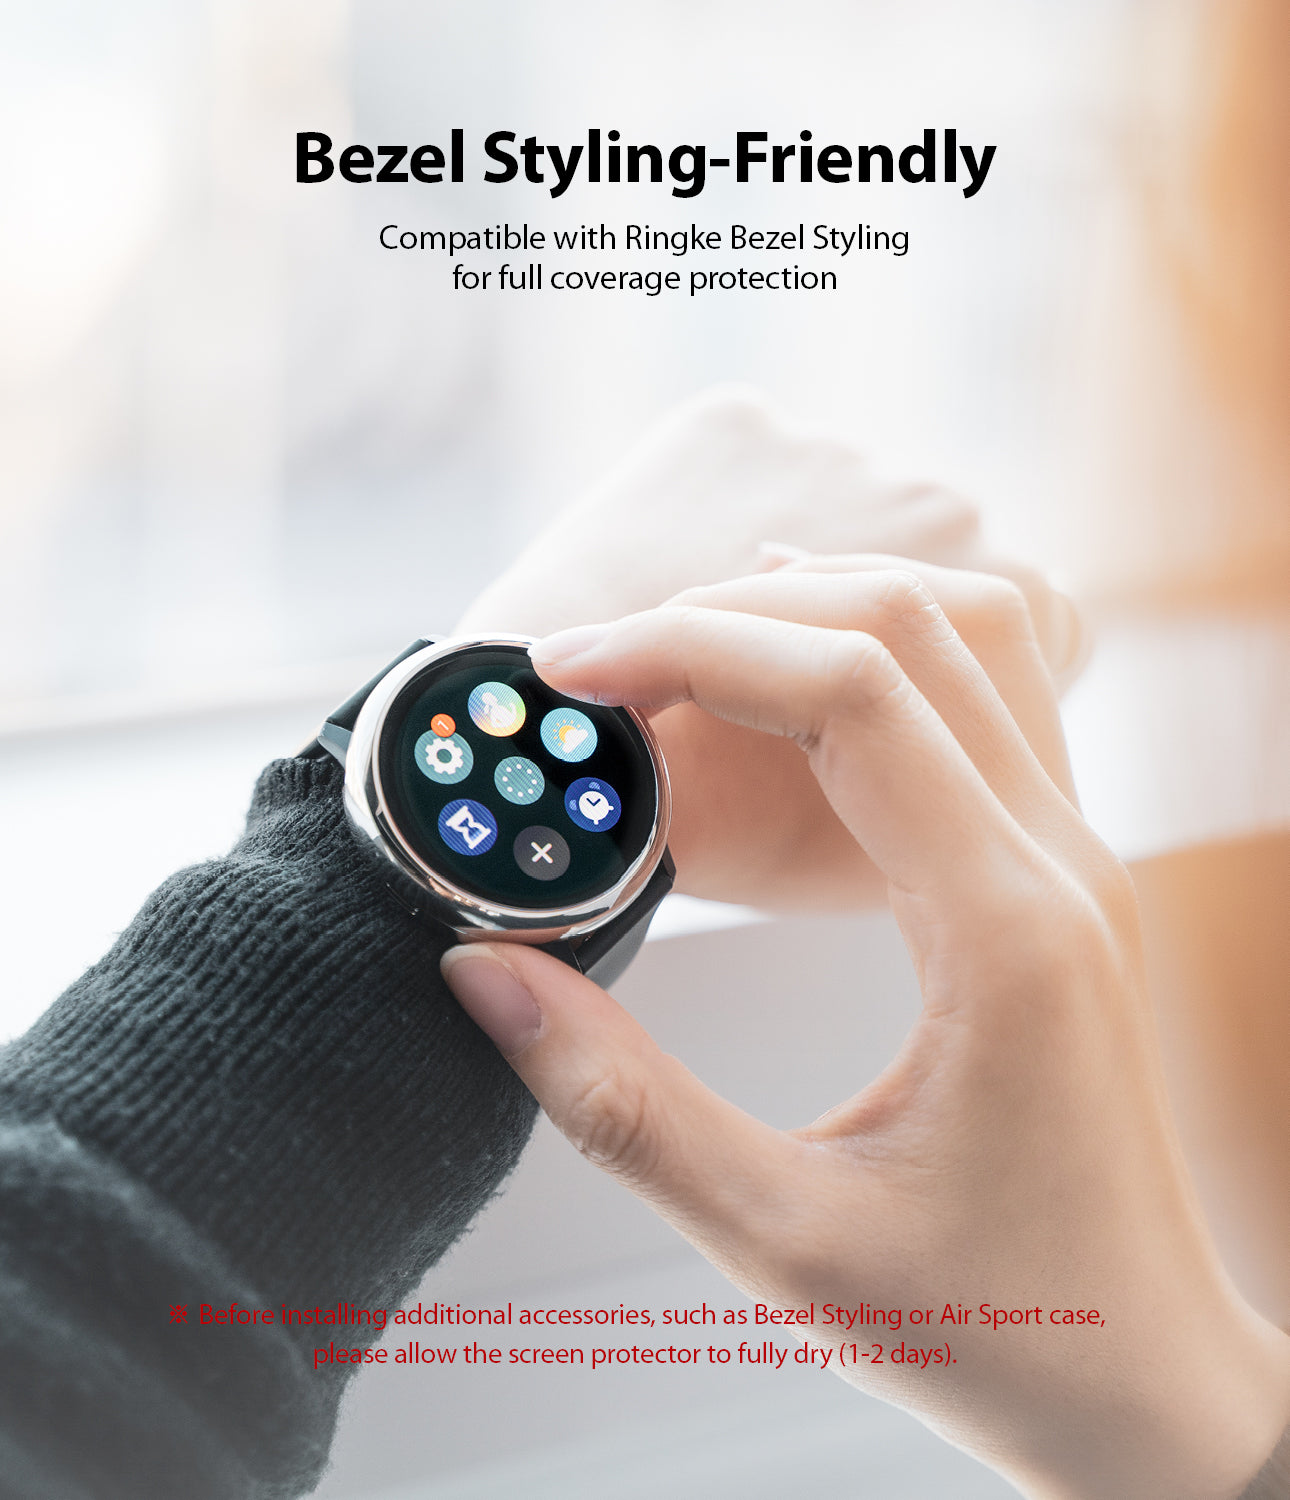 bezel styling friendly - compatible with ringke bezel styling for full coverage protection